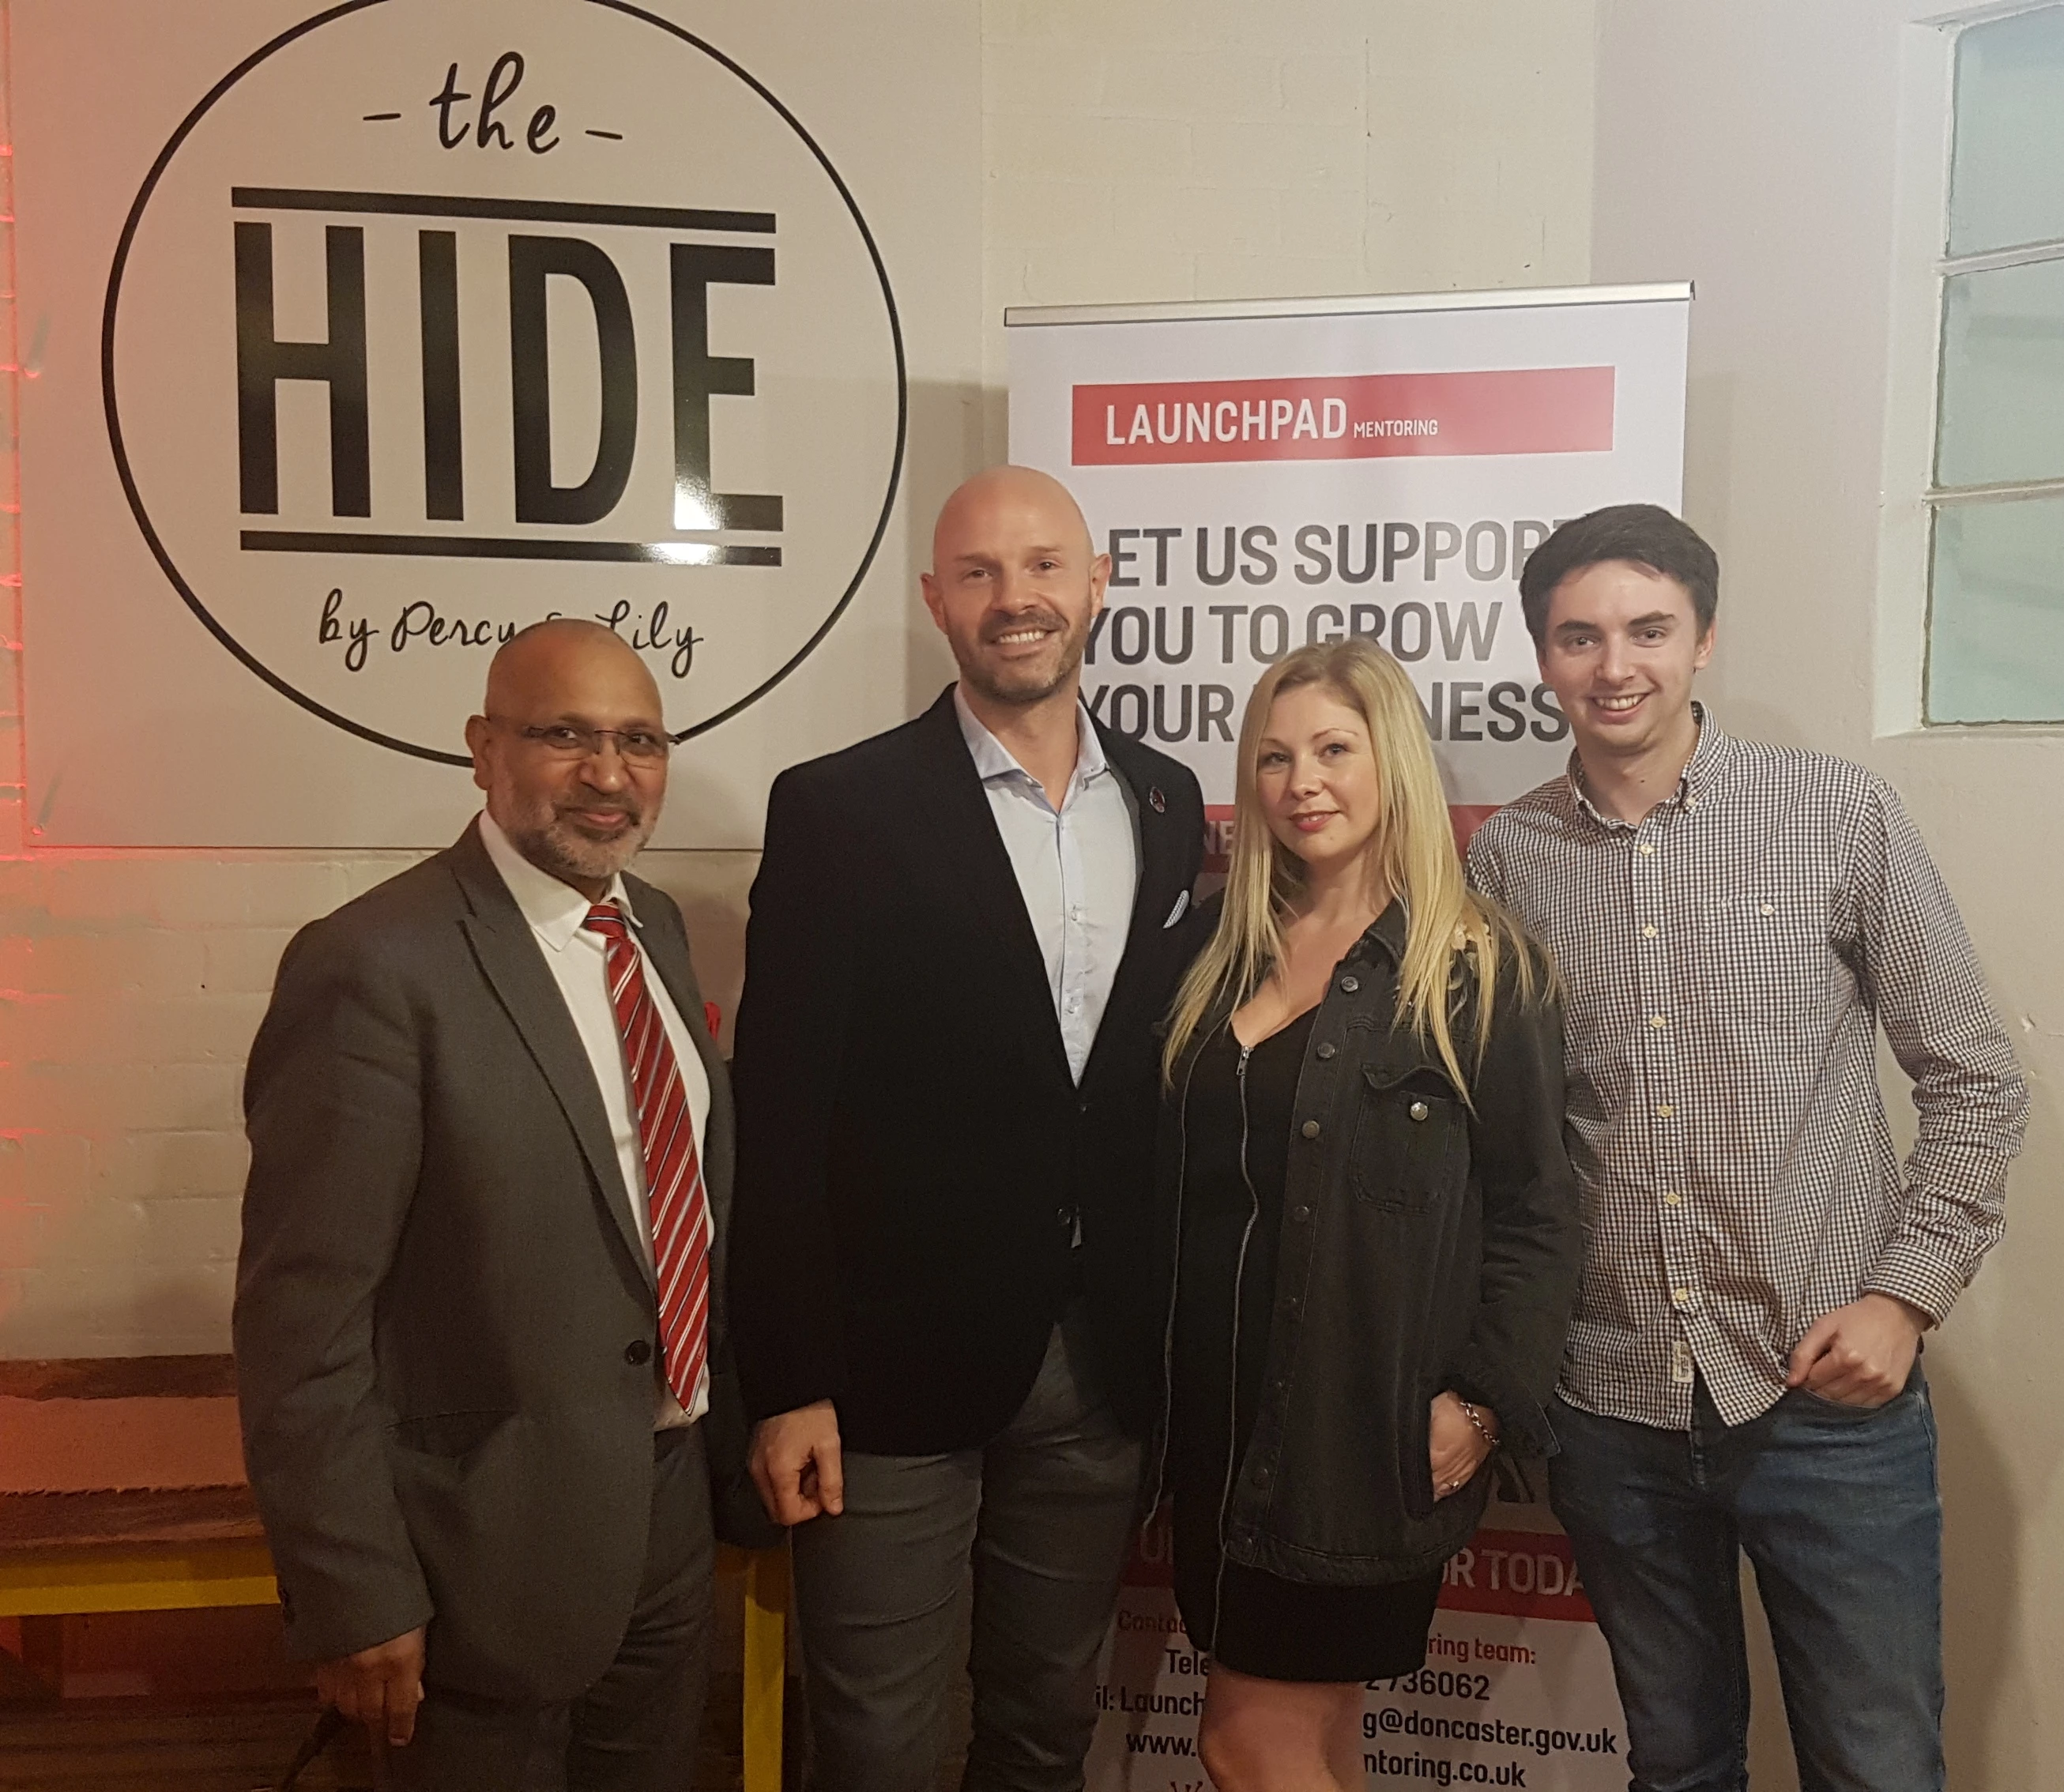 Launchpad Mentoring team and Danny Mills. L-R: Irshad Akbar, Business Mentoring Manager; Danny Mills; Gemma White, Business Mentoring Coordinator; Matt McGlone, Business Mentoring Coordinator